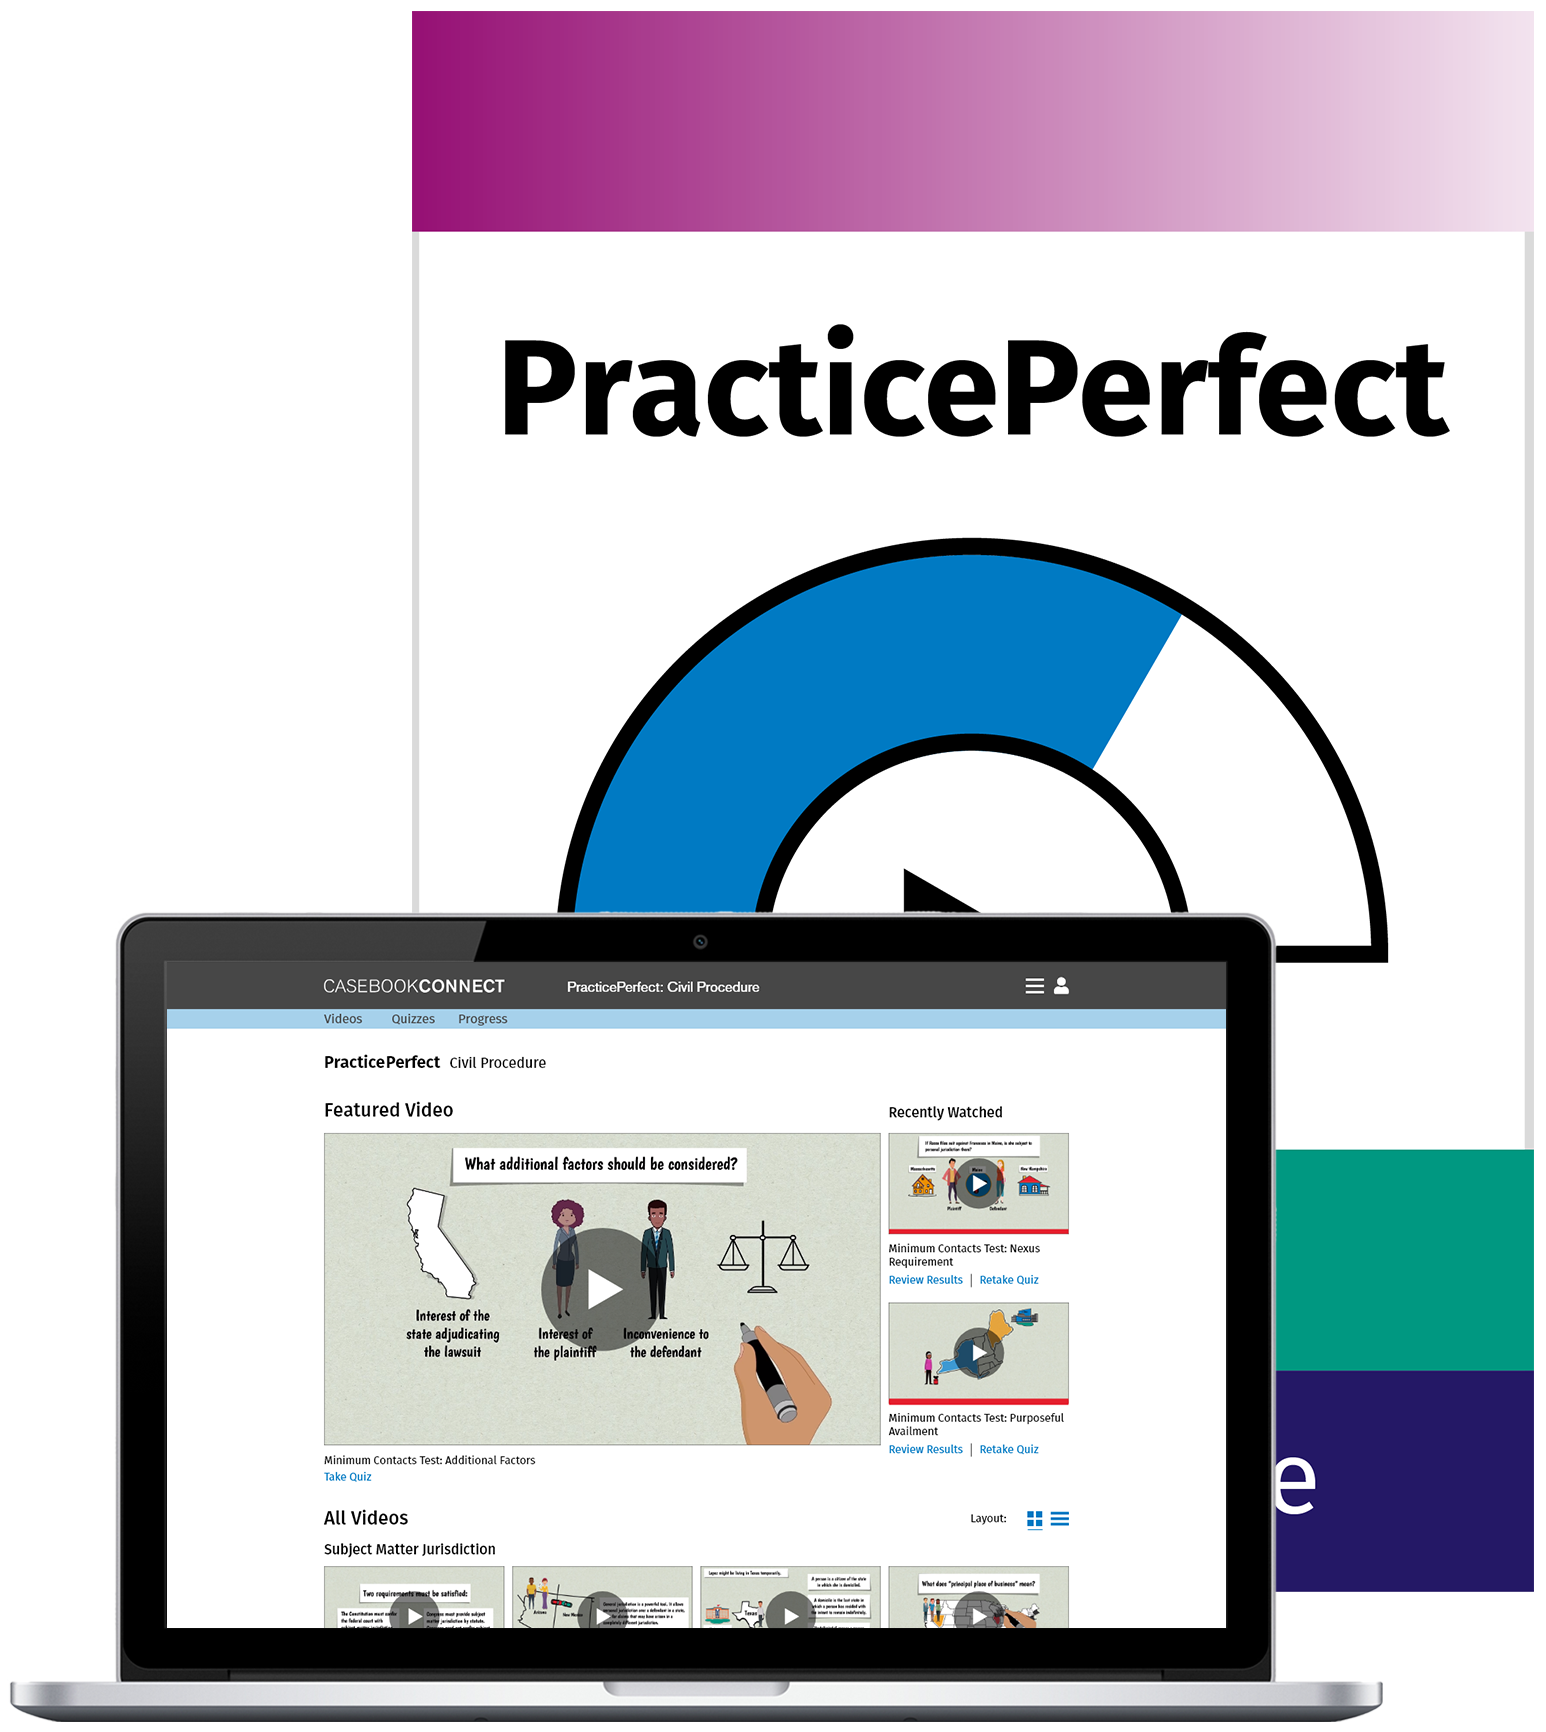 PracticePerfect logo shown with laptop open to PracticePerfect video library